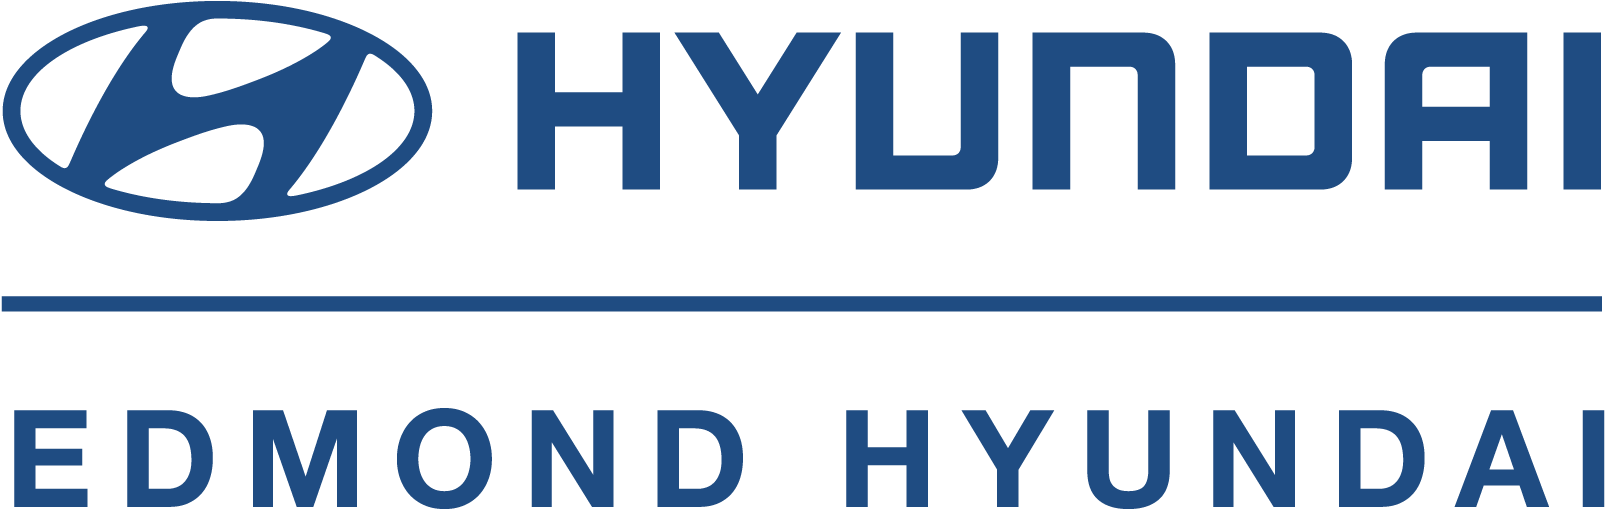 Edmond Hyundai Partners With Girl Scouts To Promote - Archery World Cup 2018 Antalya (1800x650)